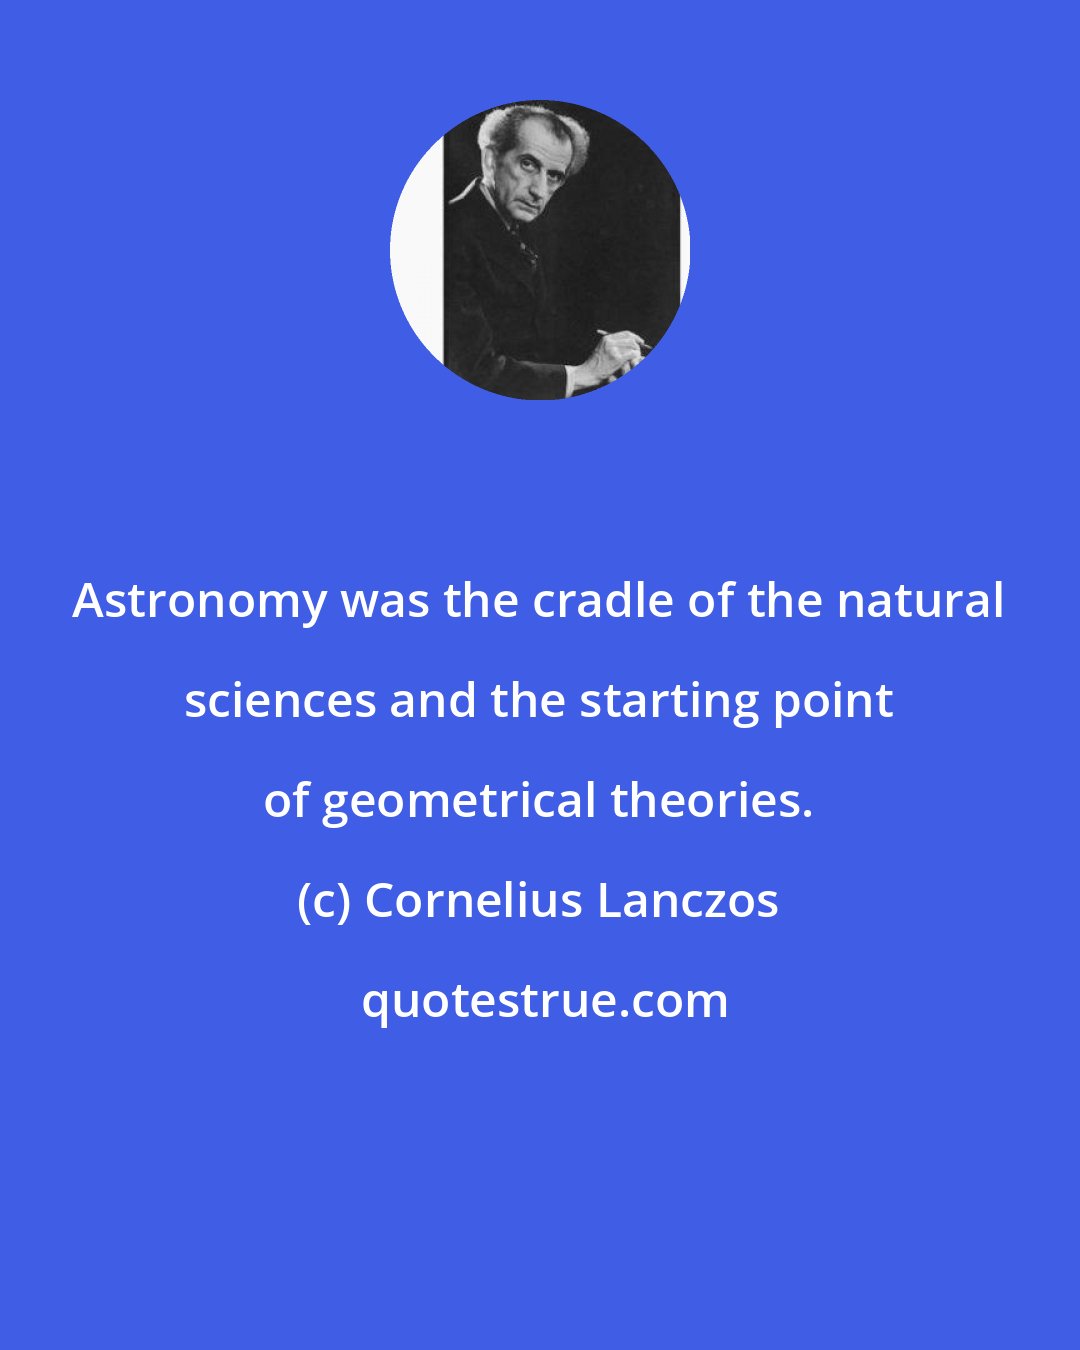 Cornelius Lanczos: Astronomy was the cradle of the natural sciences and the starting point of geometrical theories.